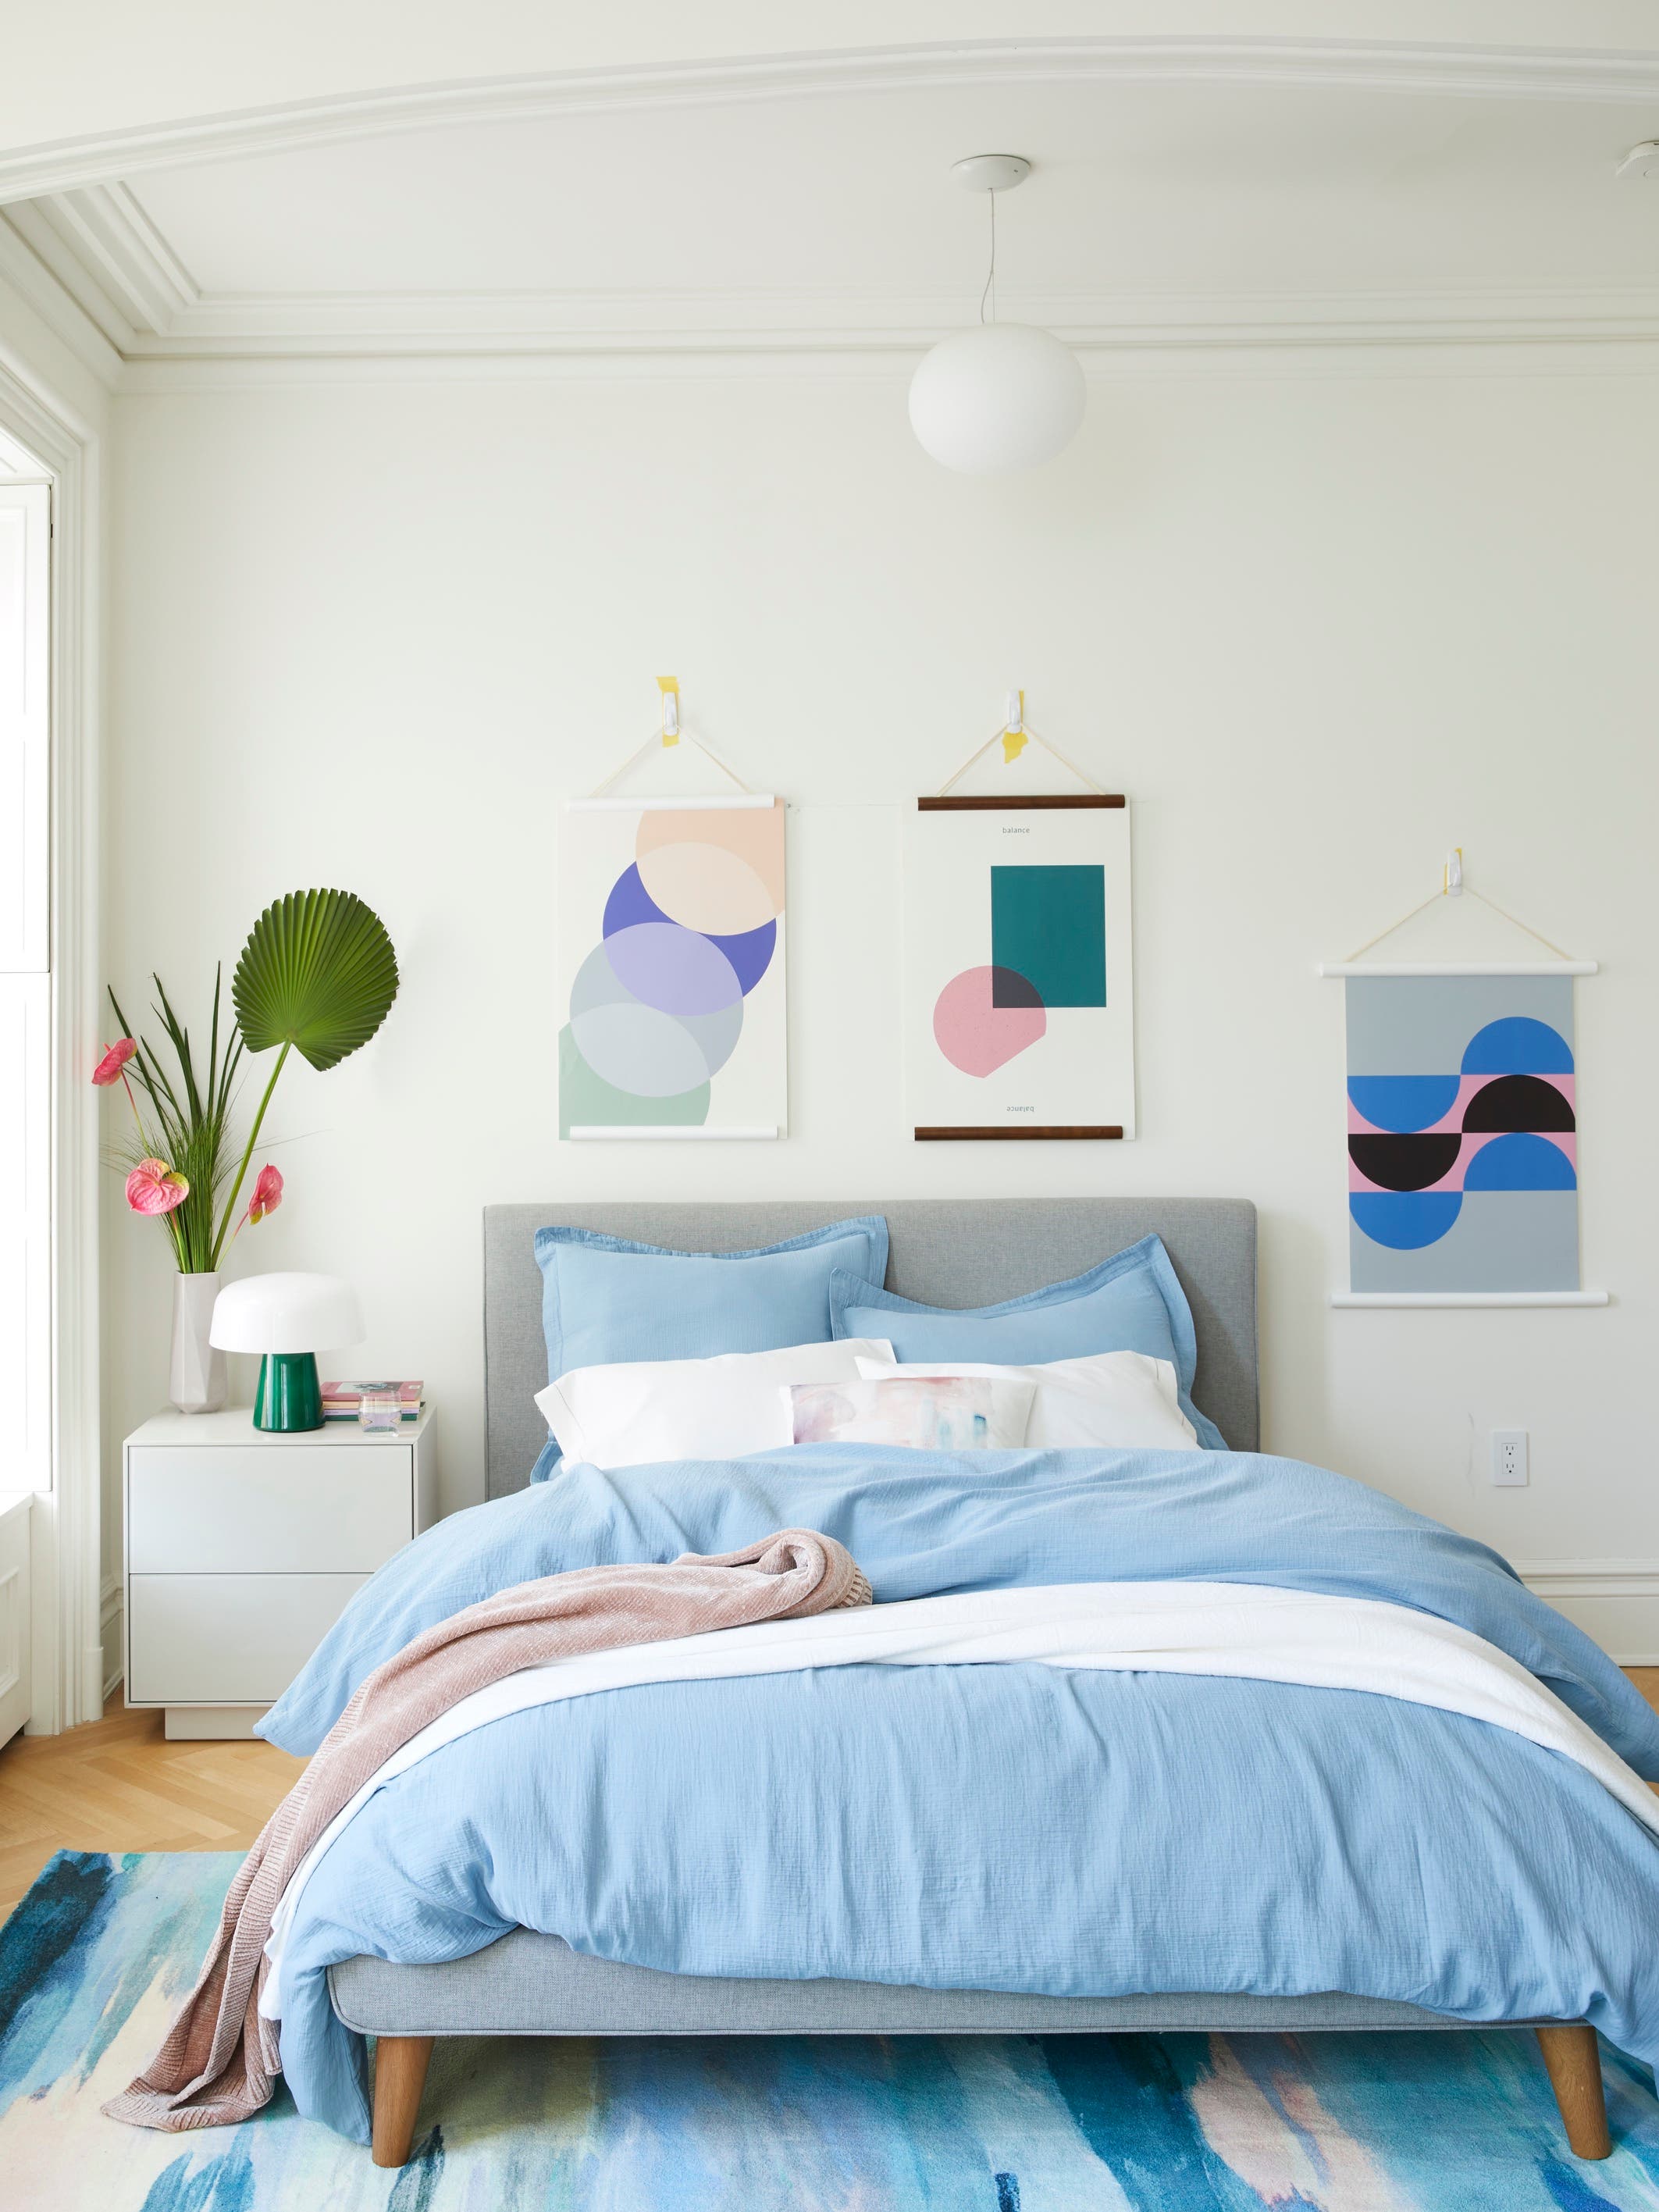 I Tried West Elm’s New Bedding Rental Program—Here’s What Happened